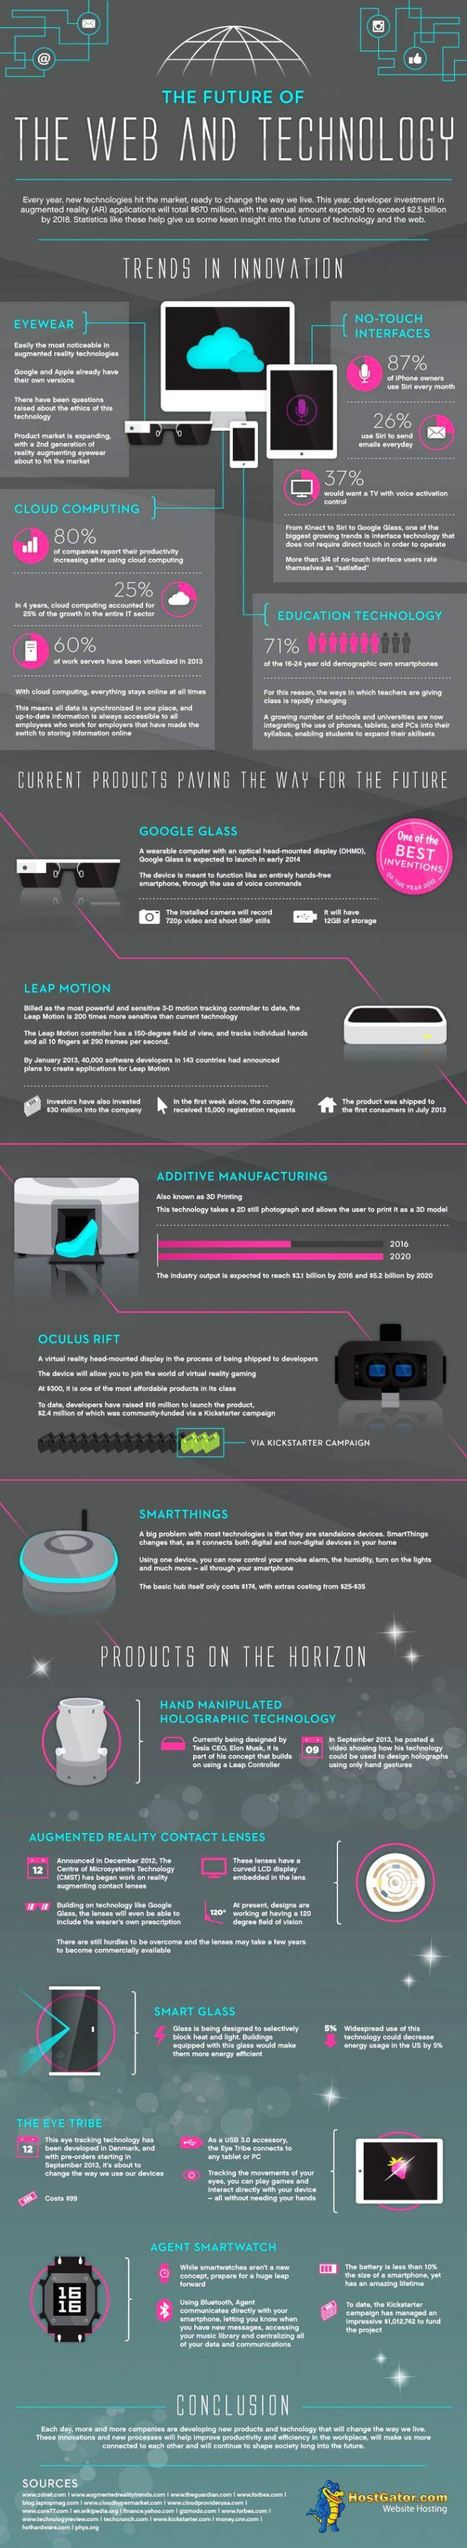 The Future of Web and Technology [Infographic] | digital marketing strategy | Scoop.it